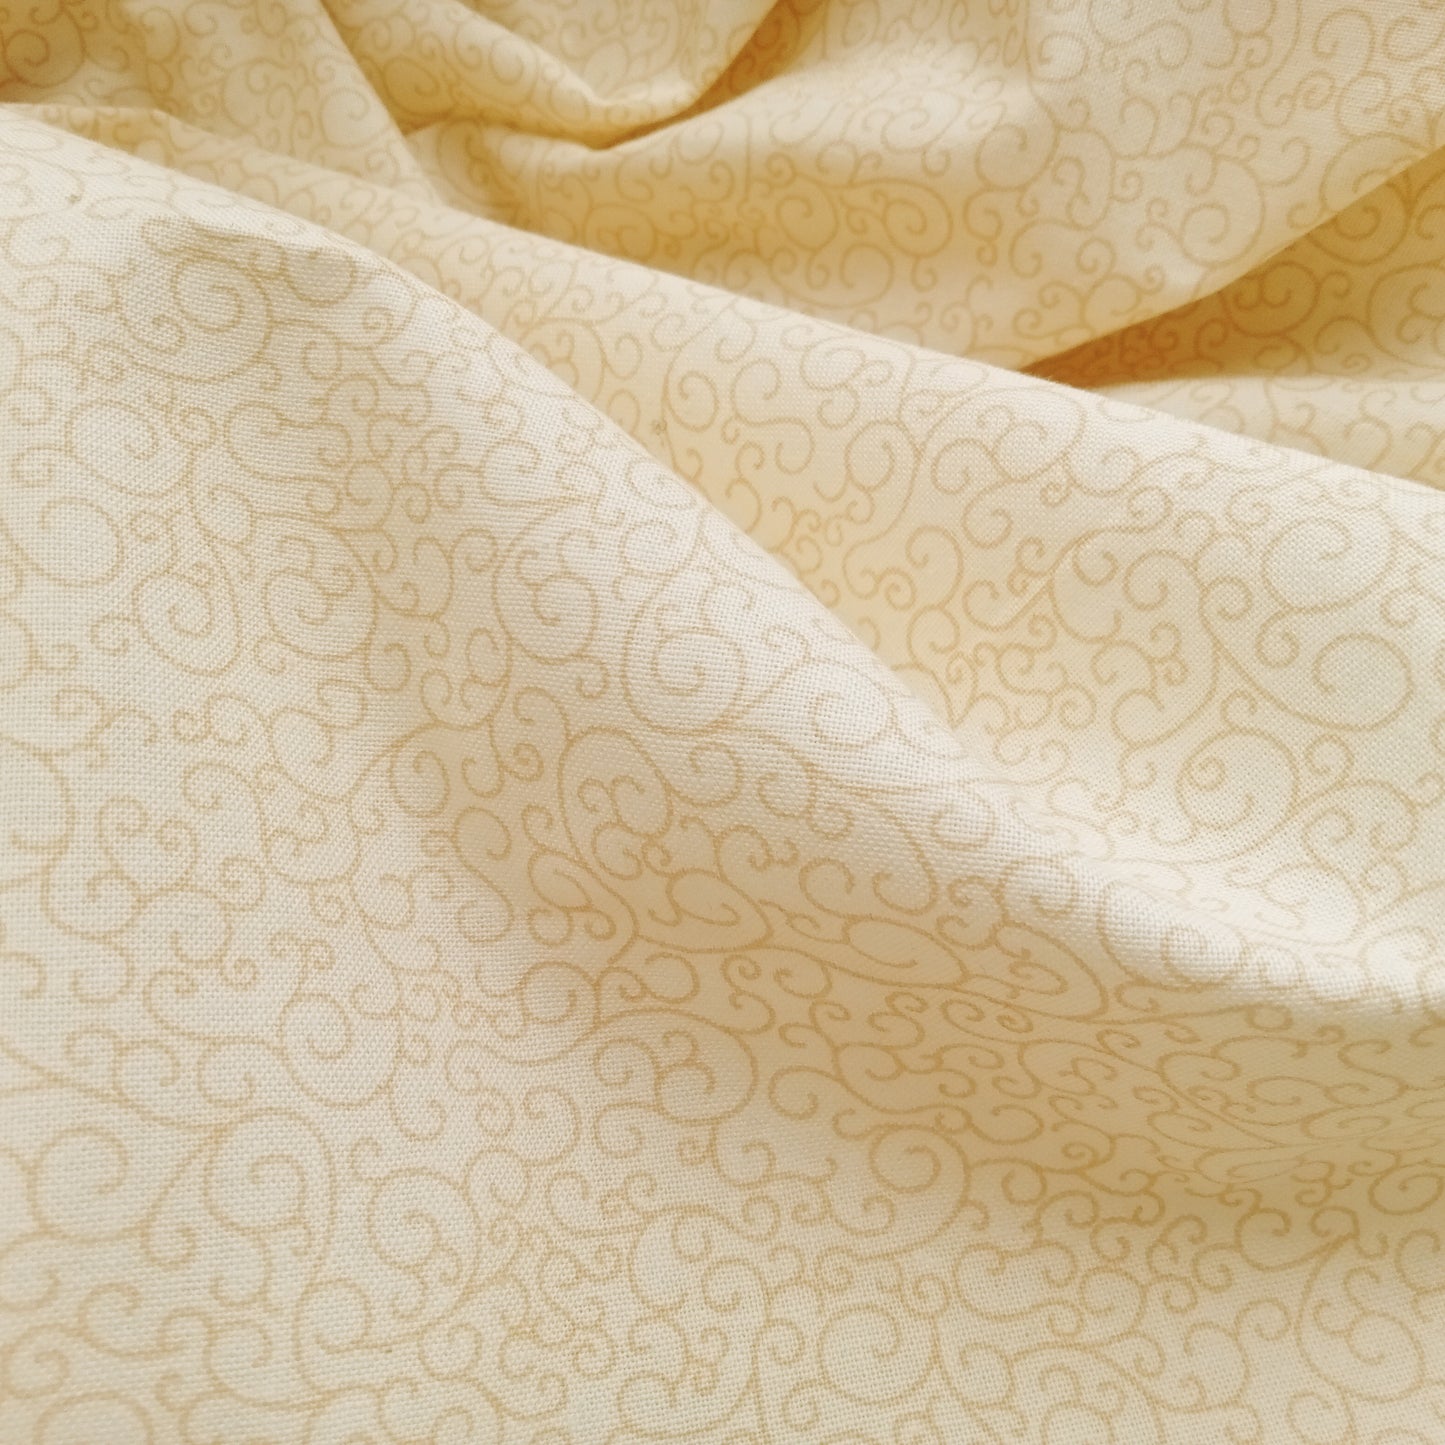 Curls printed woven cotton - 1.70mtrs